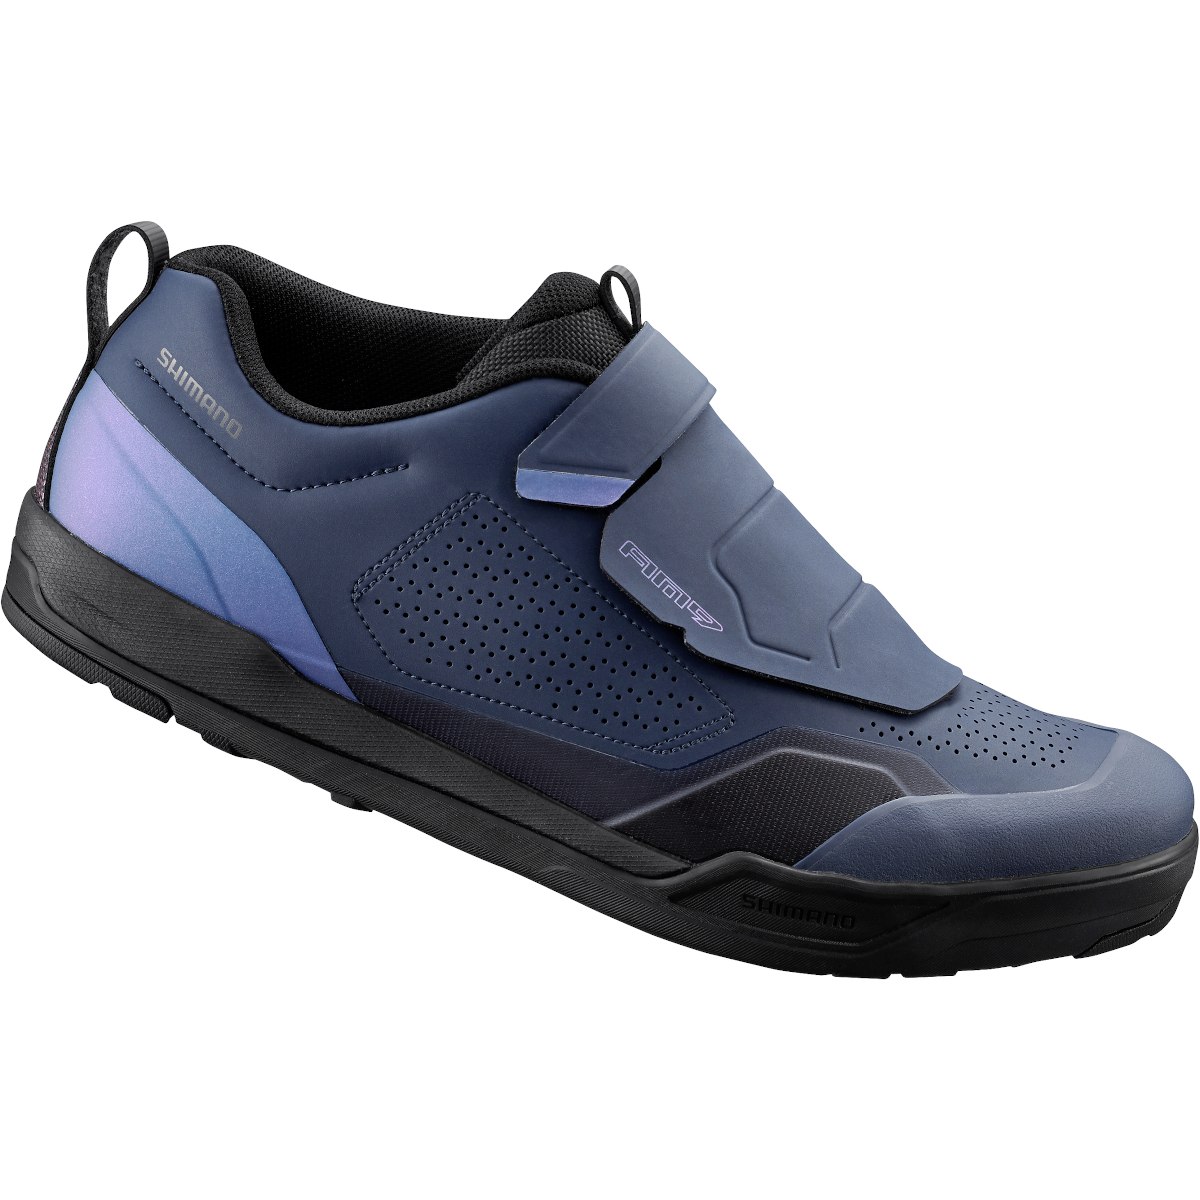 Picture of Shimano SH-AM902 Gravity SPD Shoe - navy